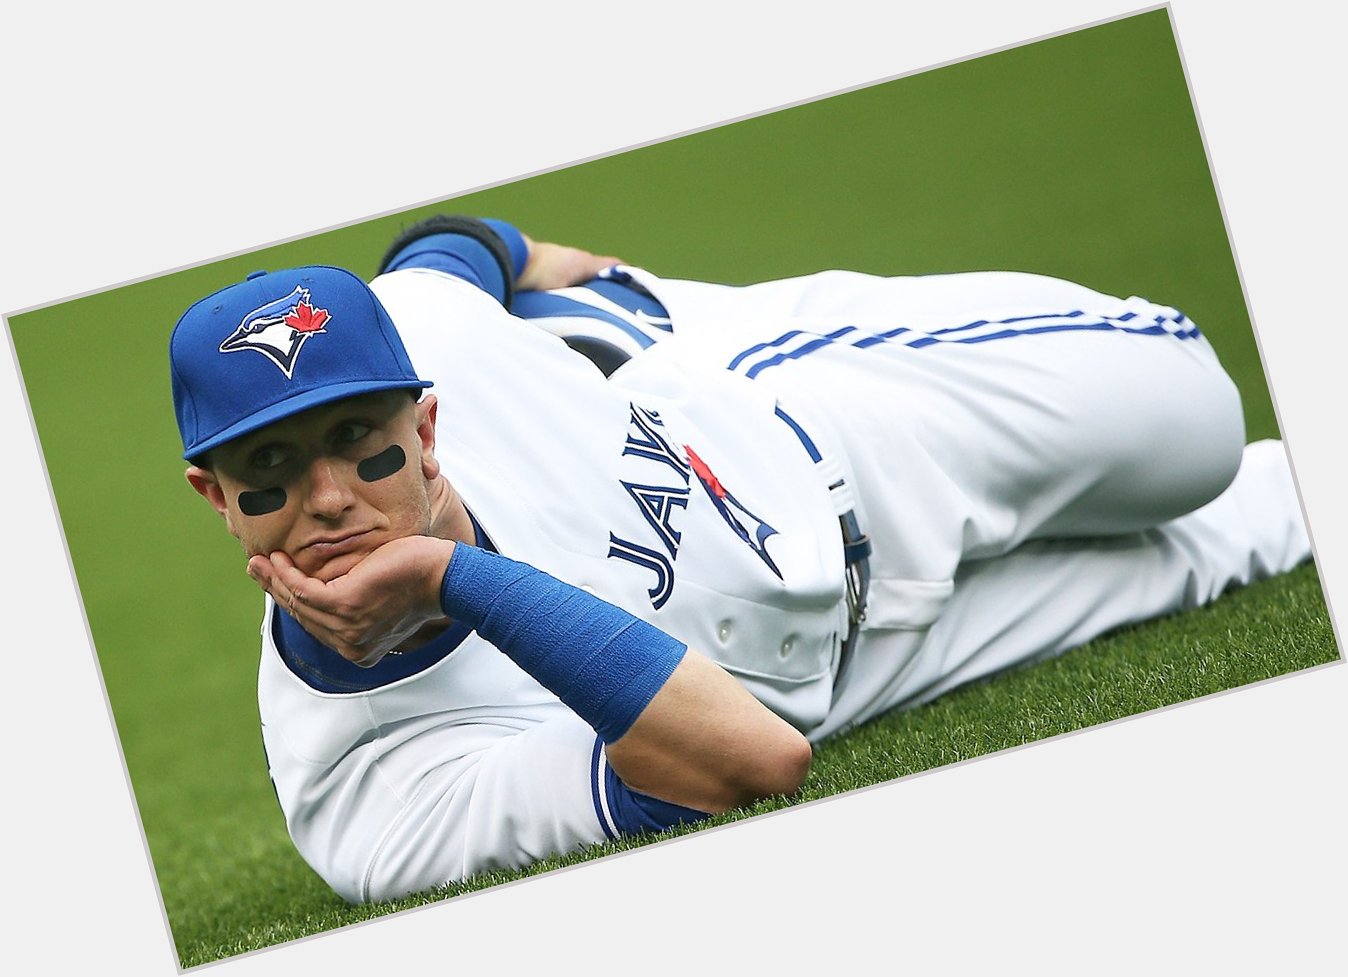 A Happy Birthday goes out to Toronto short stop Troy Tulowitzki! 